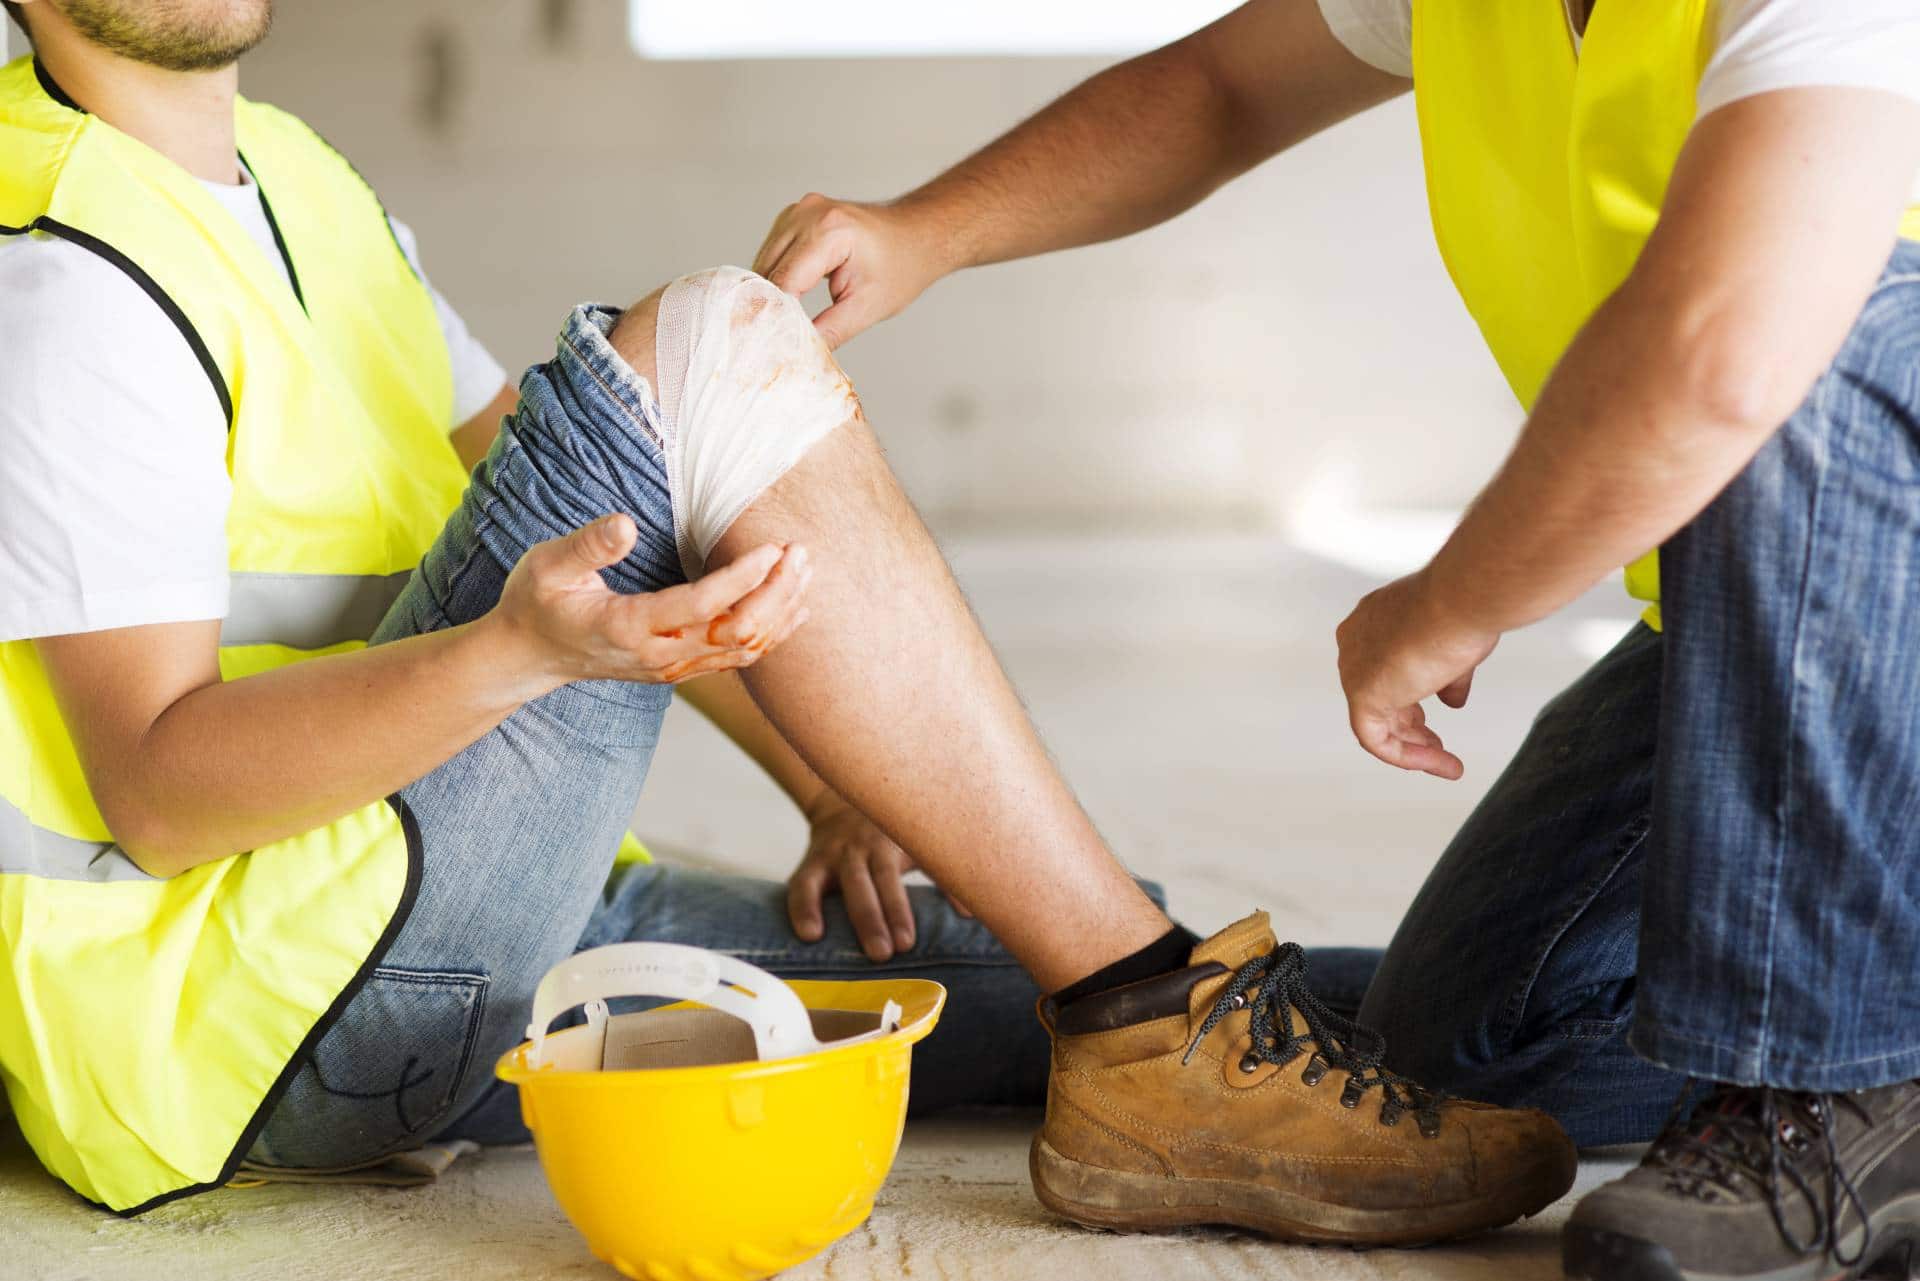 Hurt on the job? Schedule a free consultation with our personal injury lawyers at The Angell Law Firm.